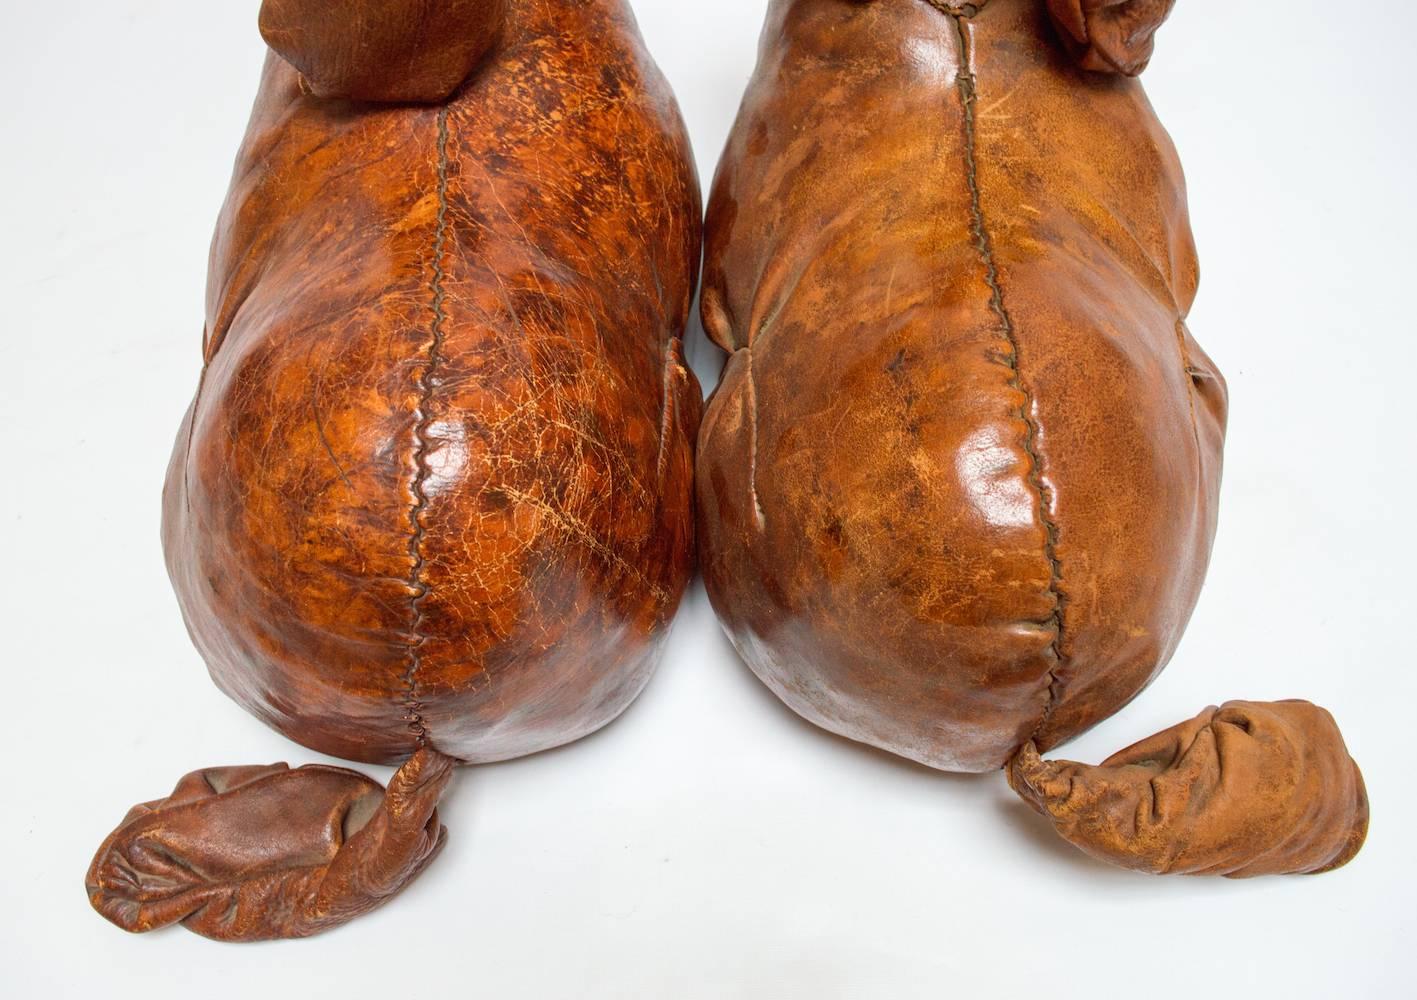 Mid-20th Century Pair of Leather King Charles Spaniels by Omersa for Abercrombie & Fitch, 1950 For Sale